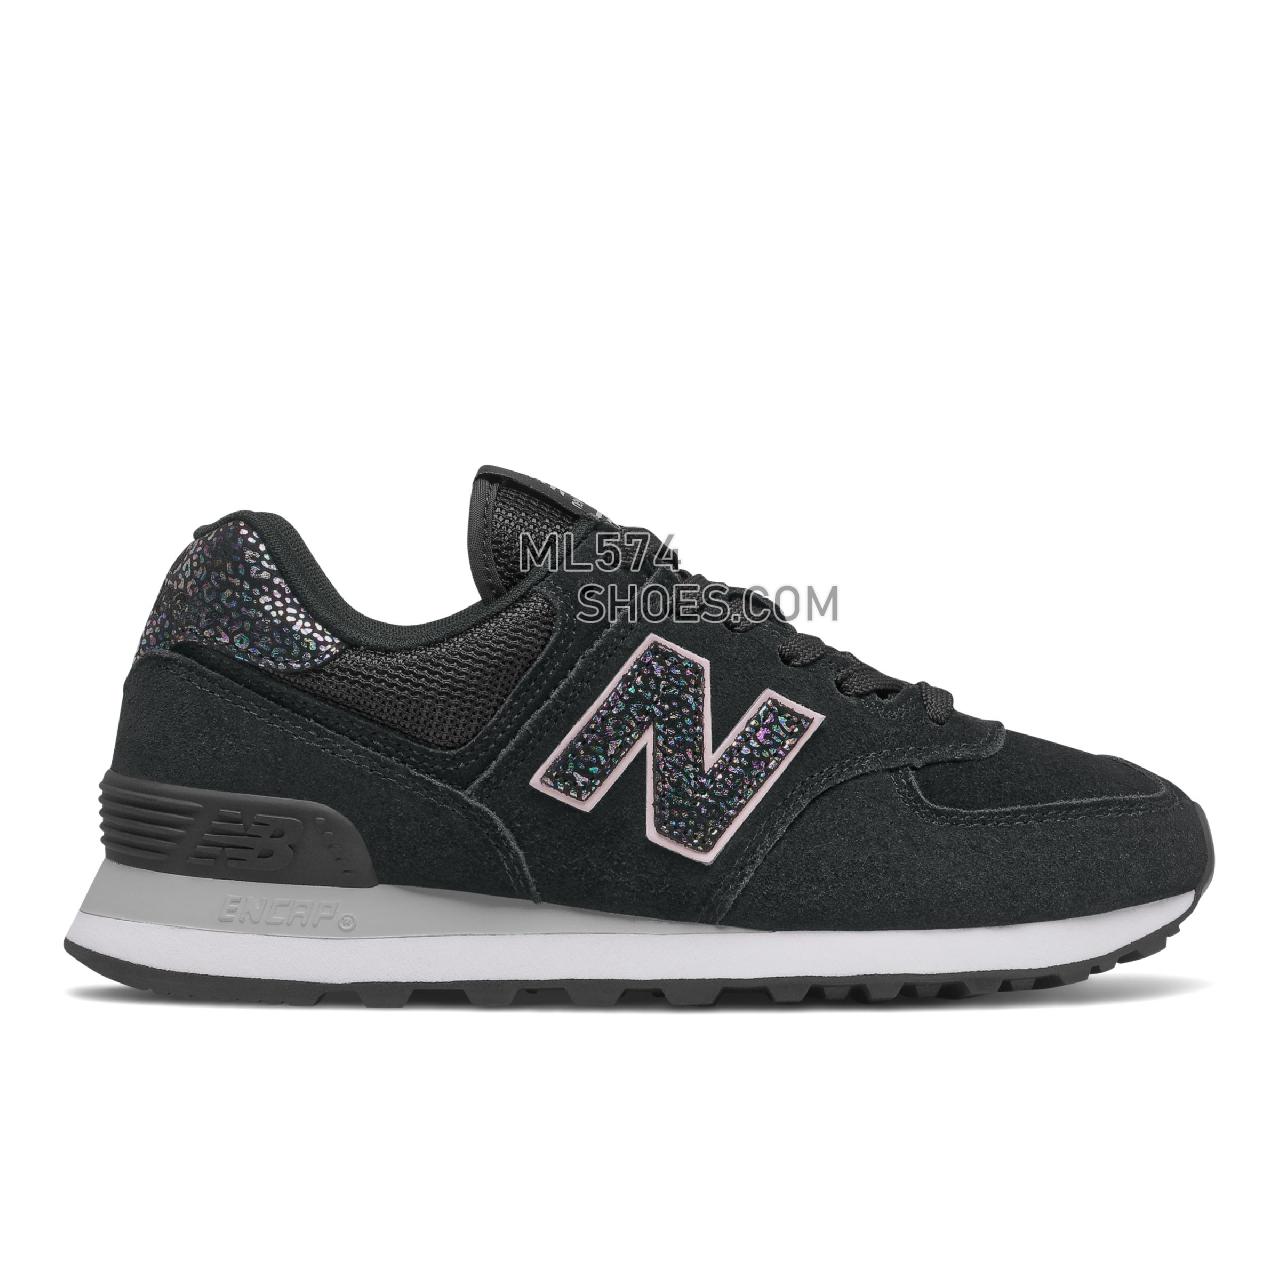 New Balance 574 - Women's Classic Sneakers - Black with White - WL574AN2